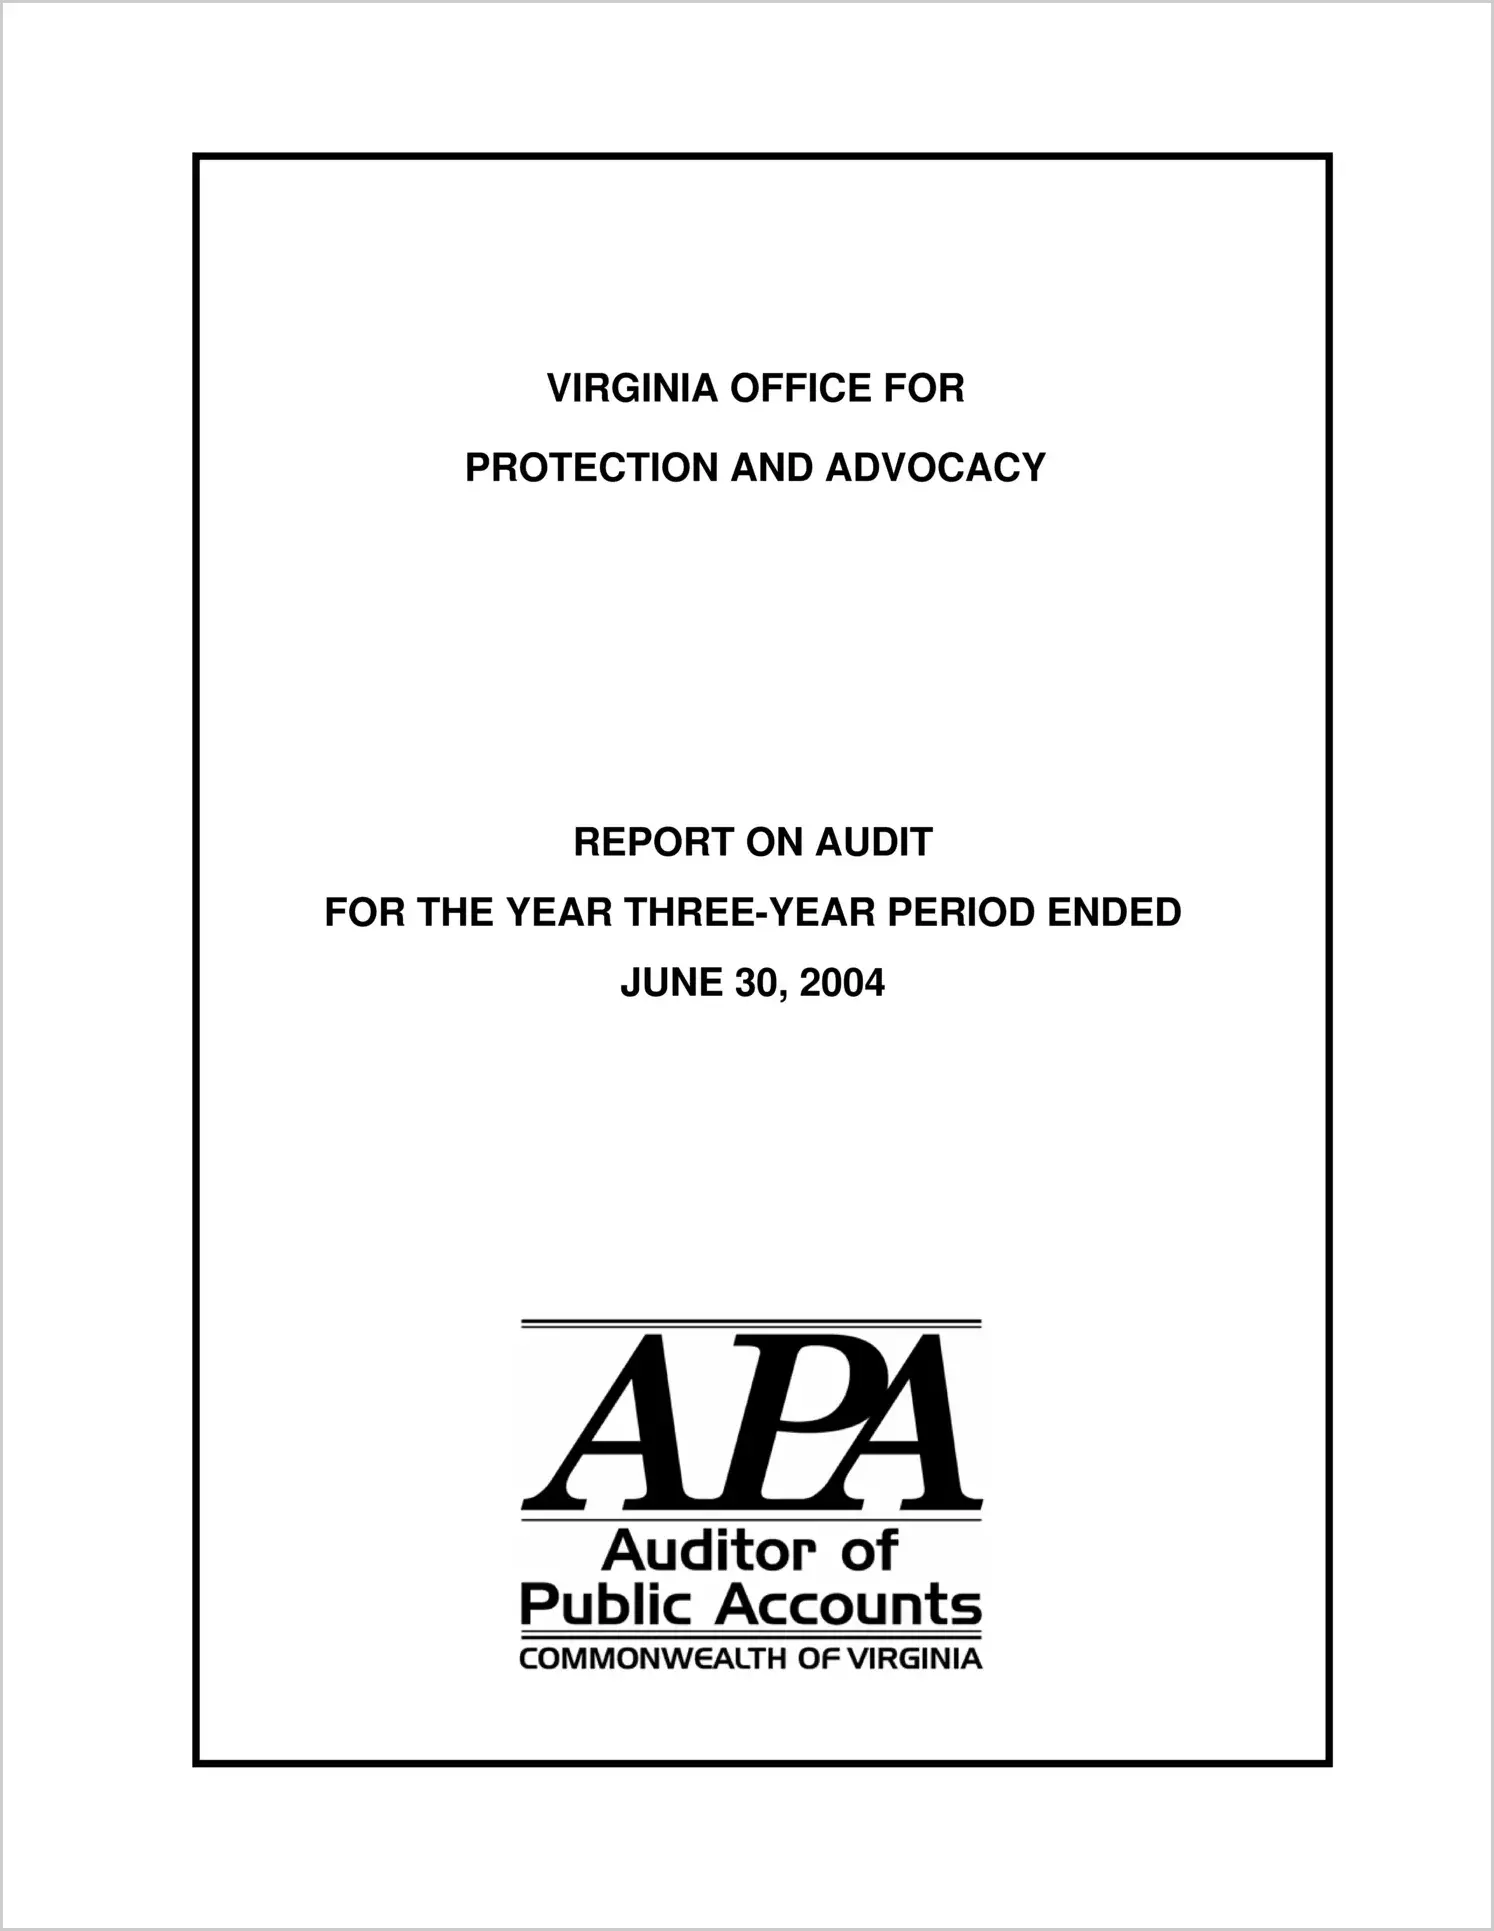 Virginia Office For Protection and Advocacy for the three-year period ended June 30, 2004